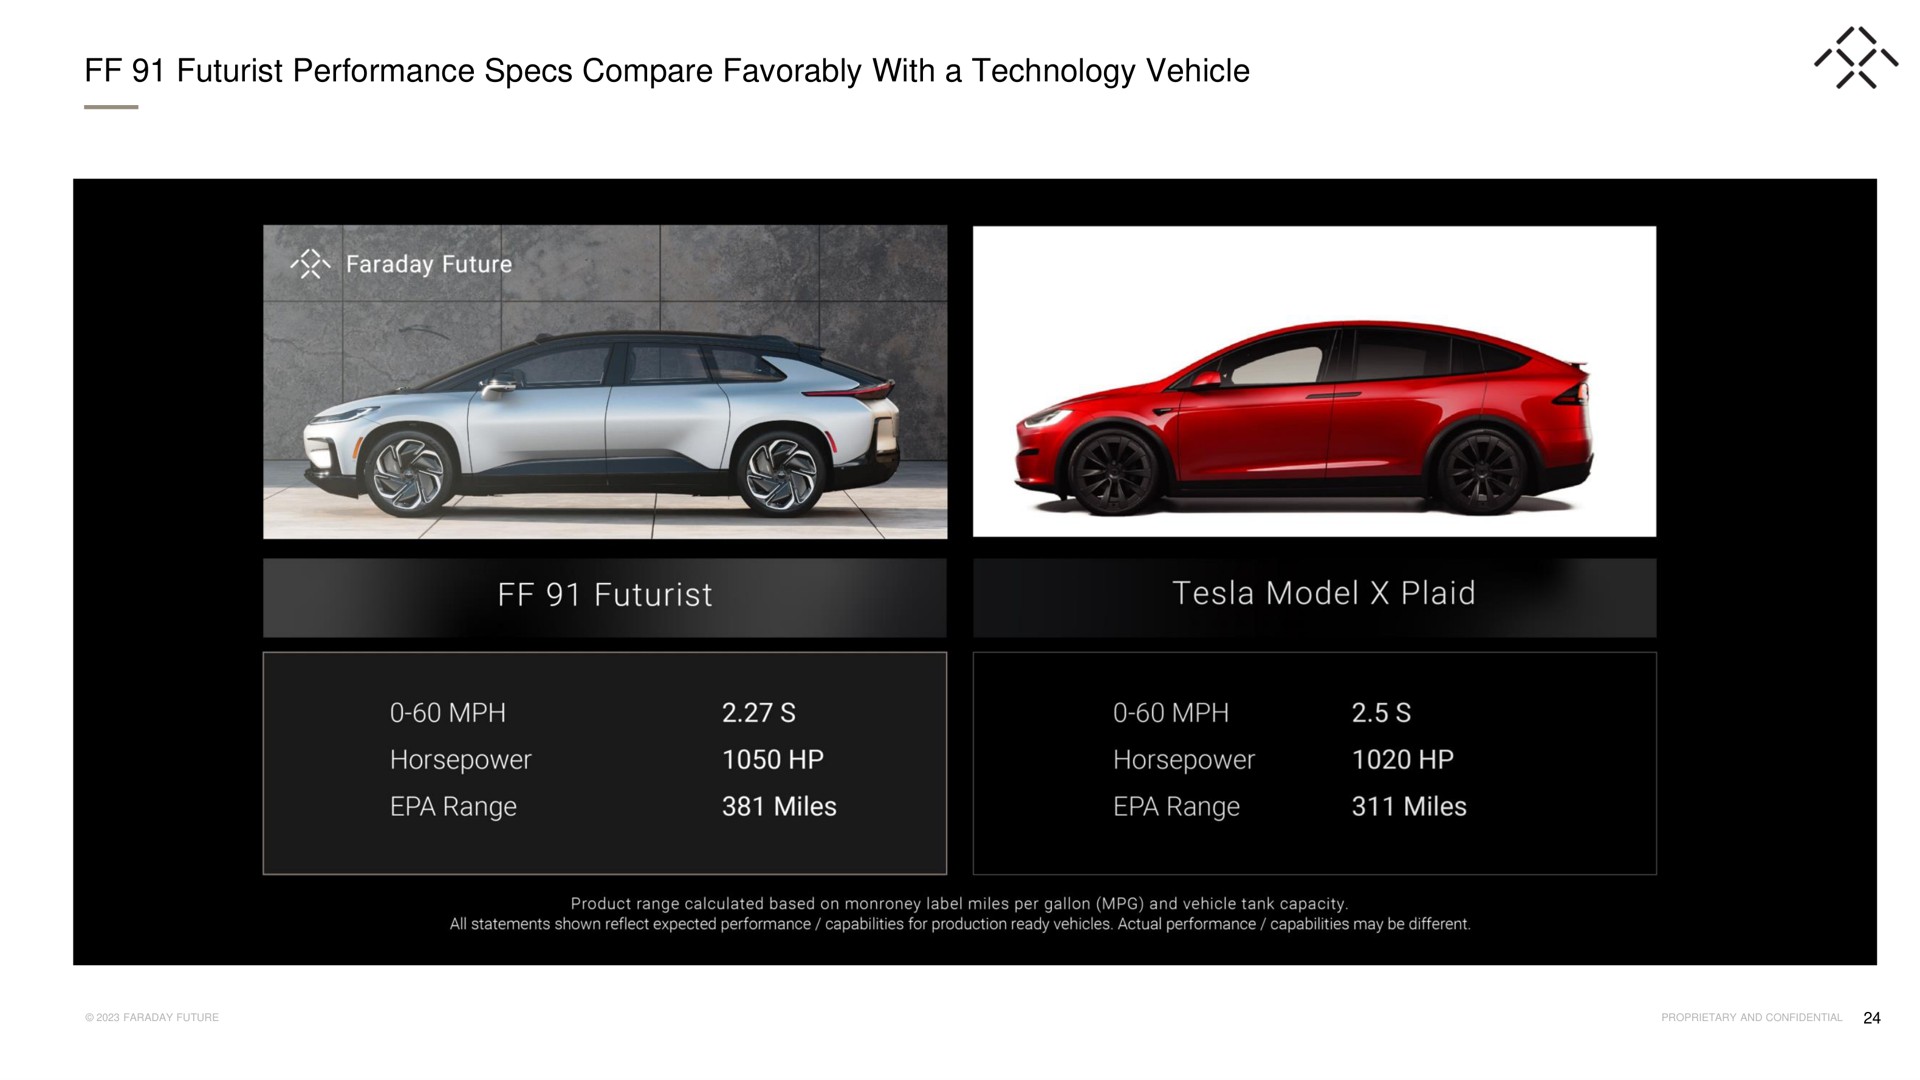 futurist performance specs compare favorably with a technology vehicle ces melee model plaid | Faraday Future